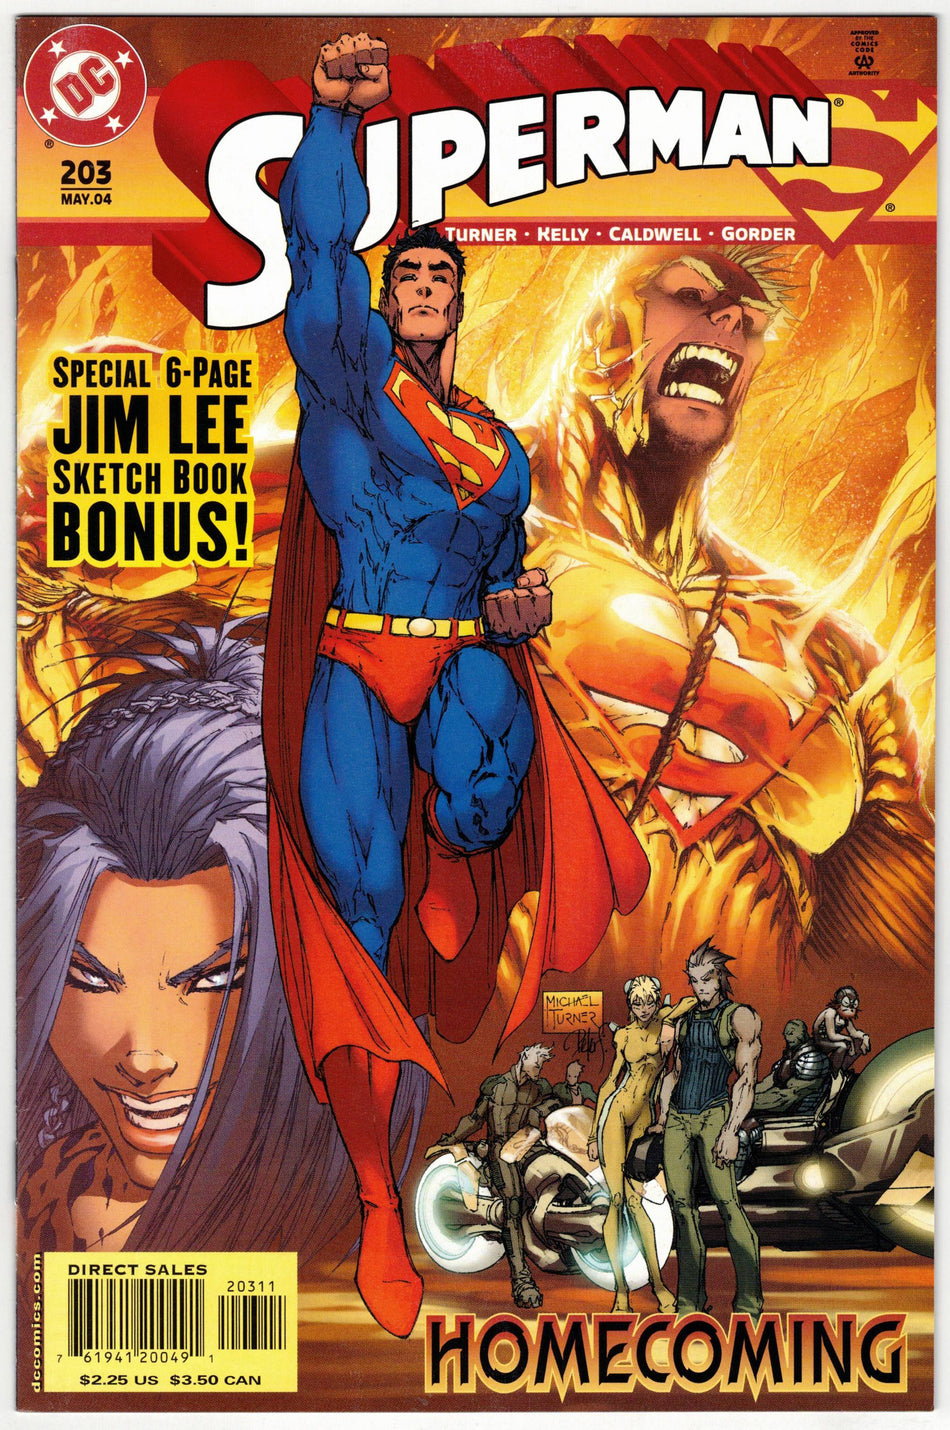 Photo of Superman, Vol. 2 (2004) Issue 203 - Comic sold by Stronghold Collectibles